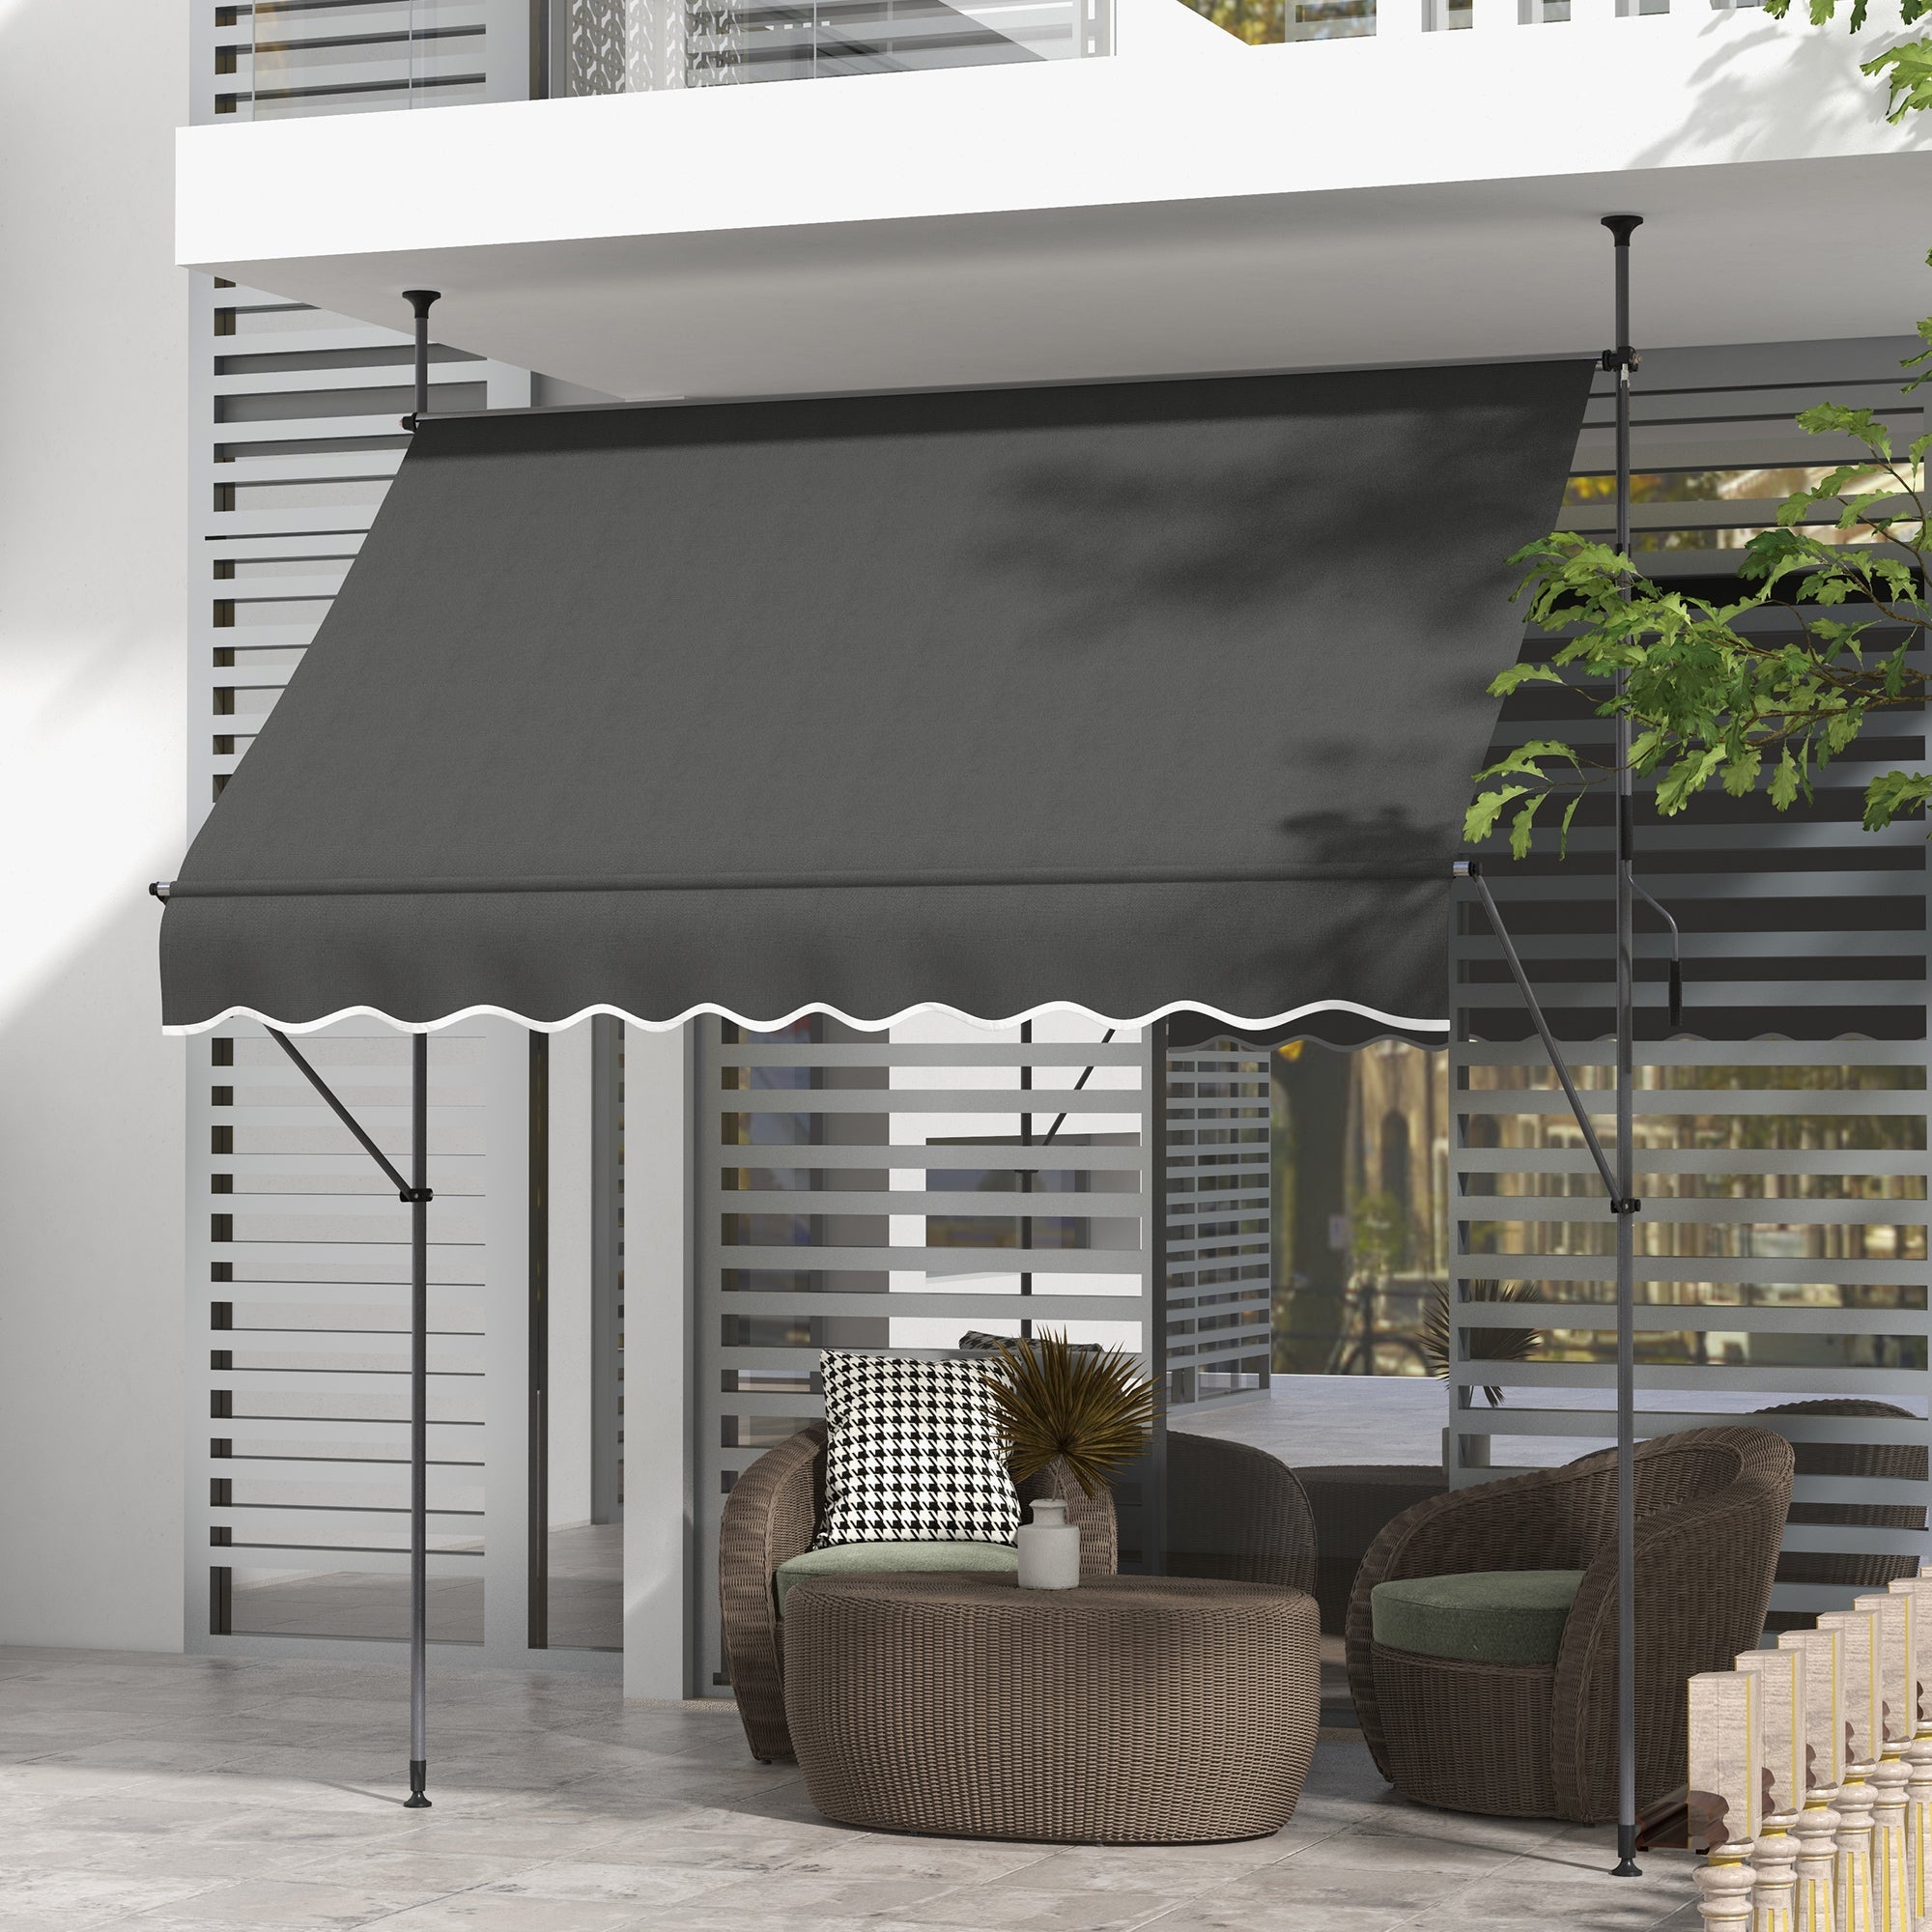 2.5 x 1.2m Retractable Awning, Free Standing Patio Sun Shade Shelter, UV Resistant, for Window and Door, Dark Grey-1